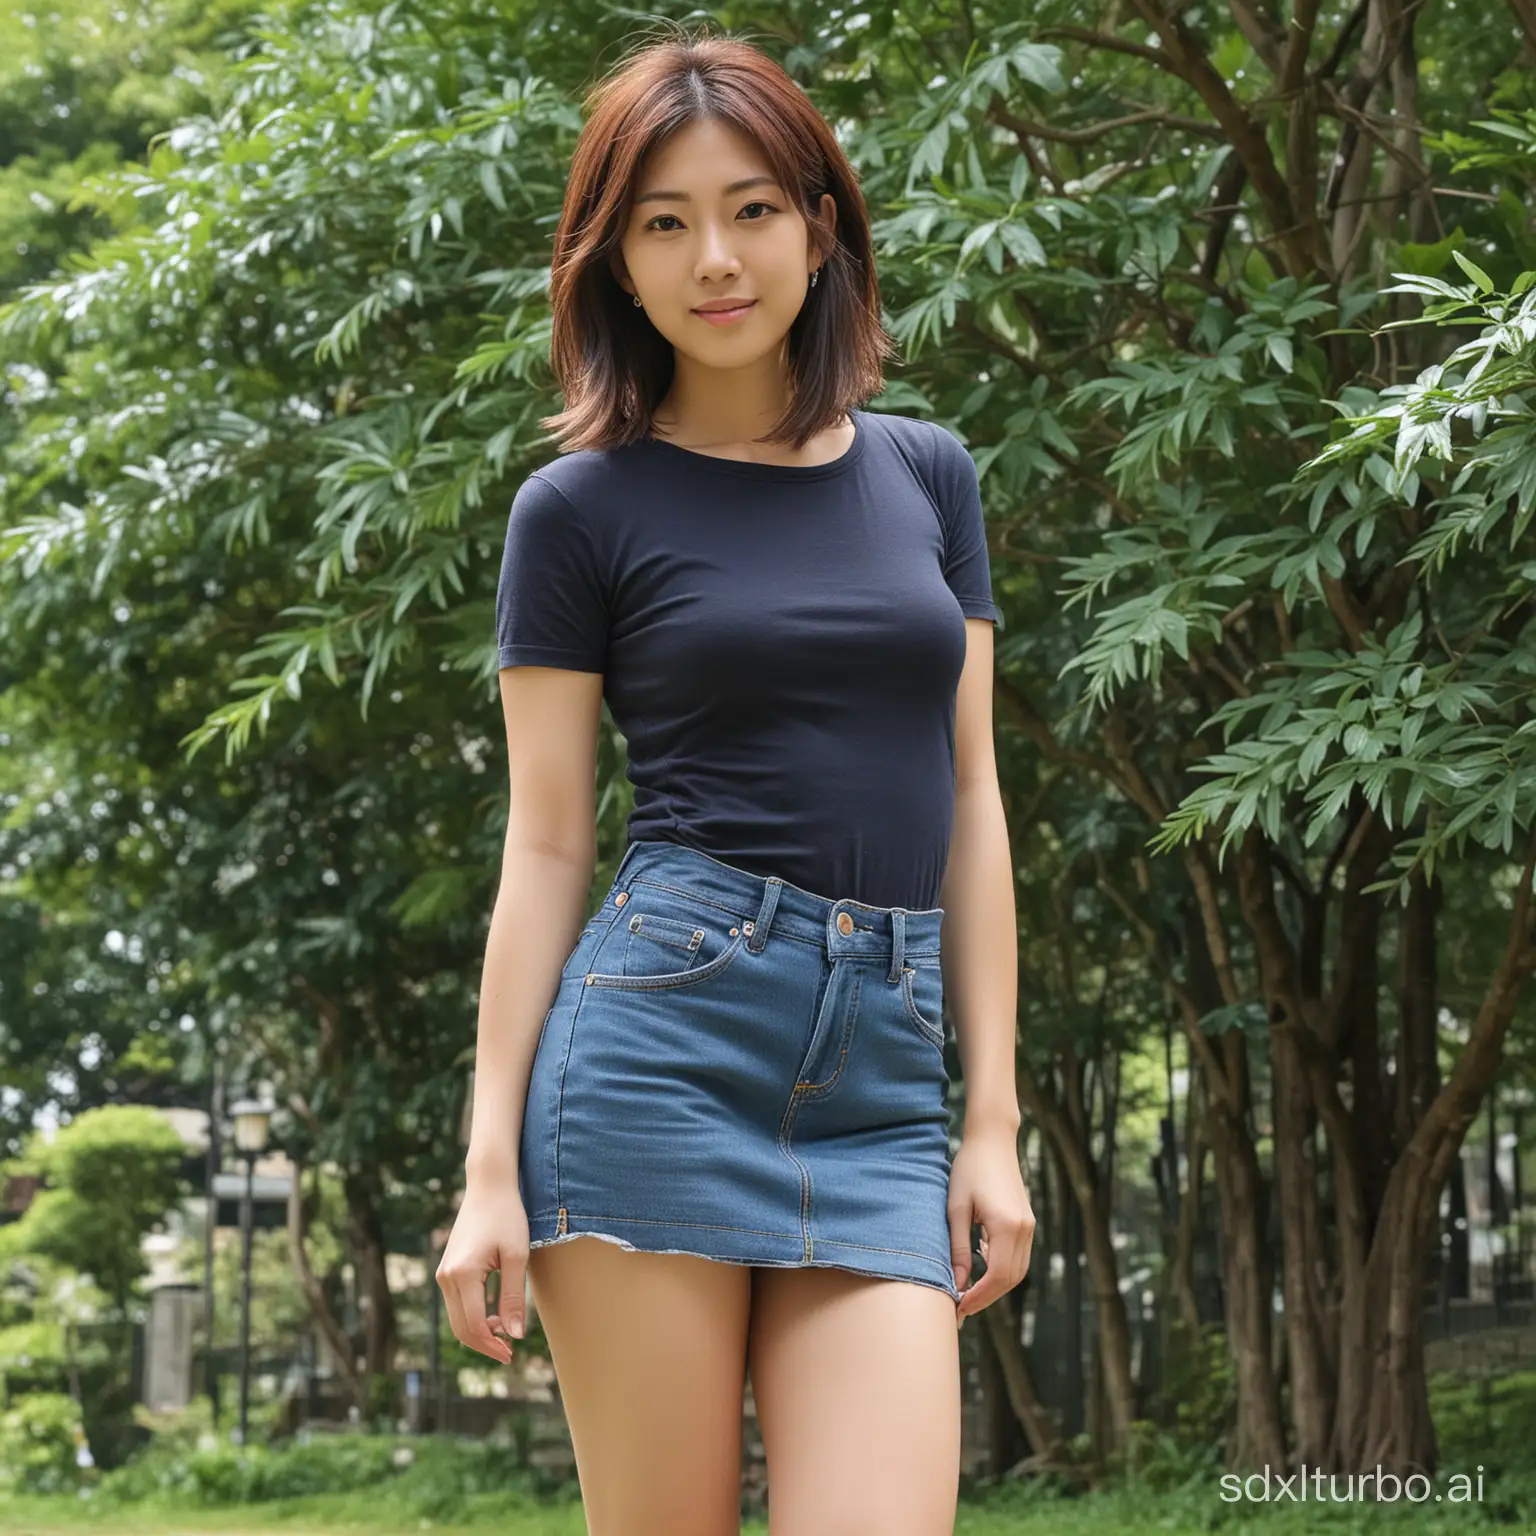 Young-Japanese-Woman-in-Denim-Mini-Skirt-Standing-in-Green-Park